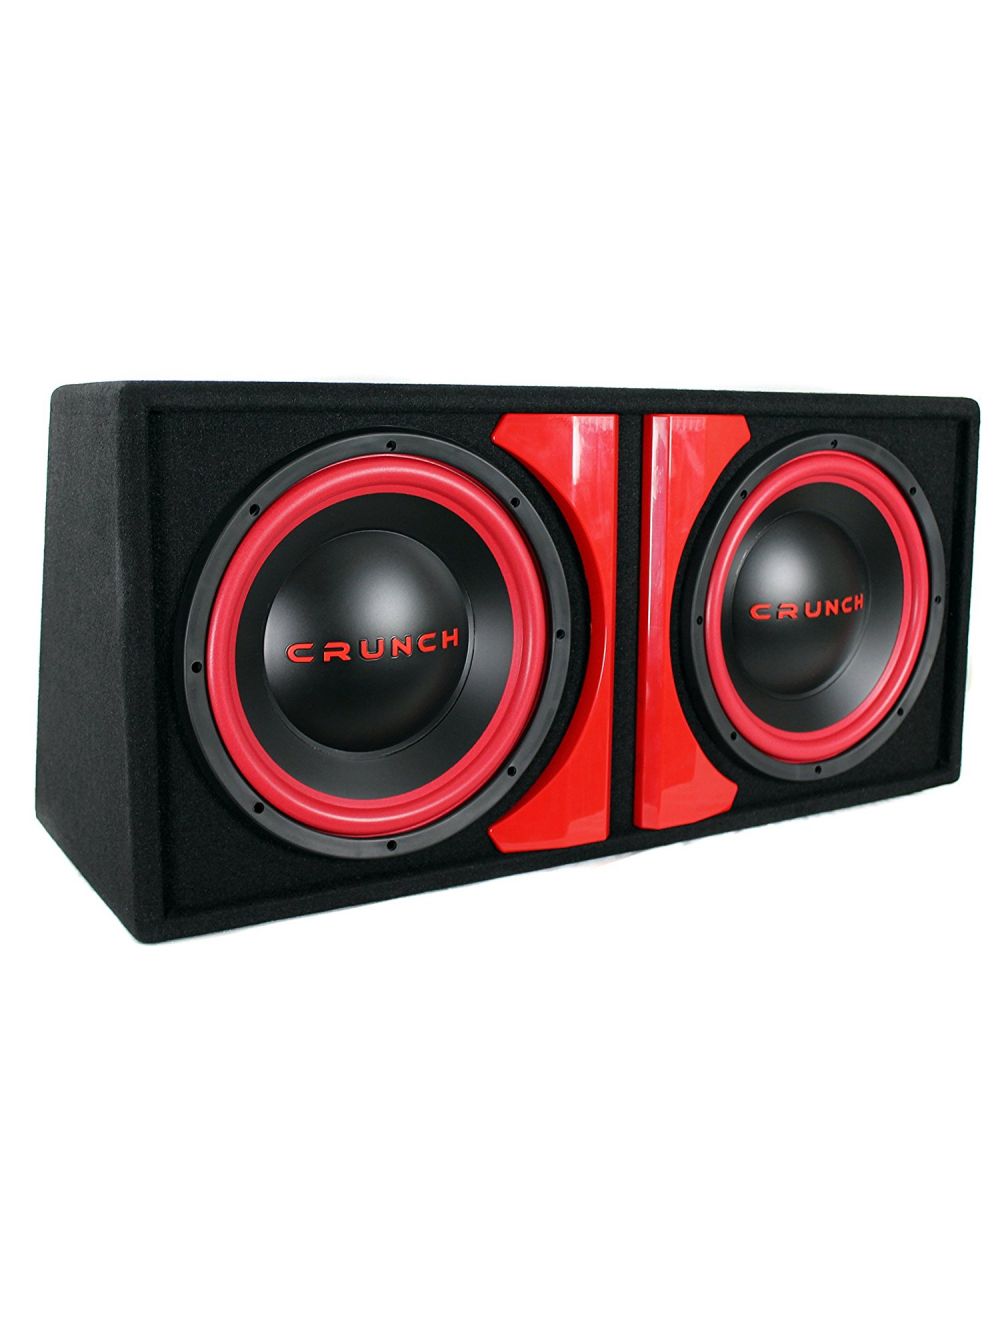 Crunch Cr212a Cr-212a Powered Dual 12 Subwoofer System